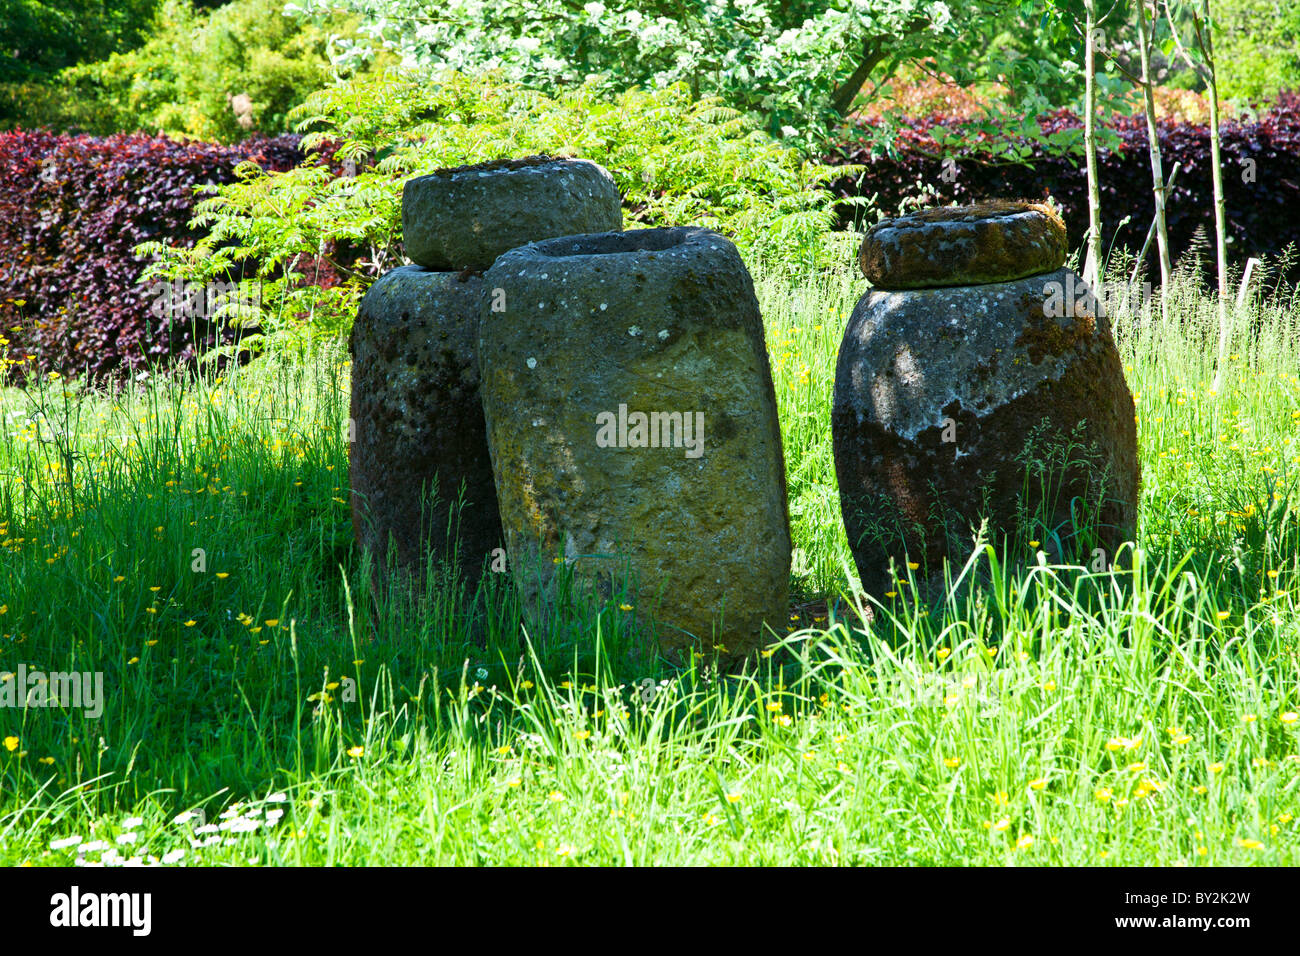 Three decorative old pots or urns in an English country garden in summer Stock Photo